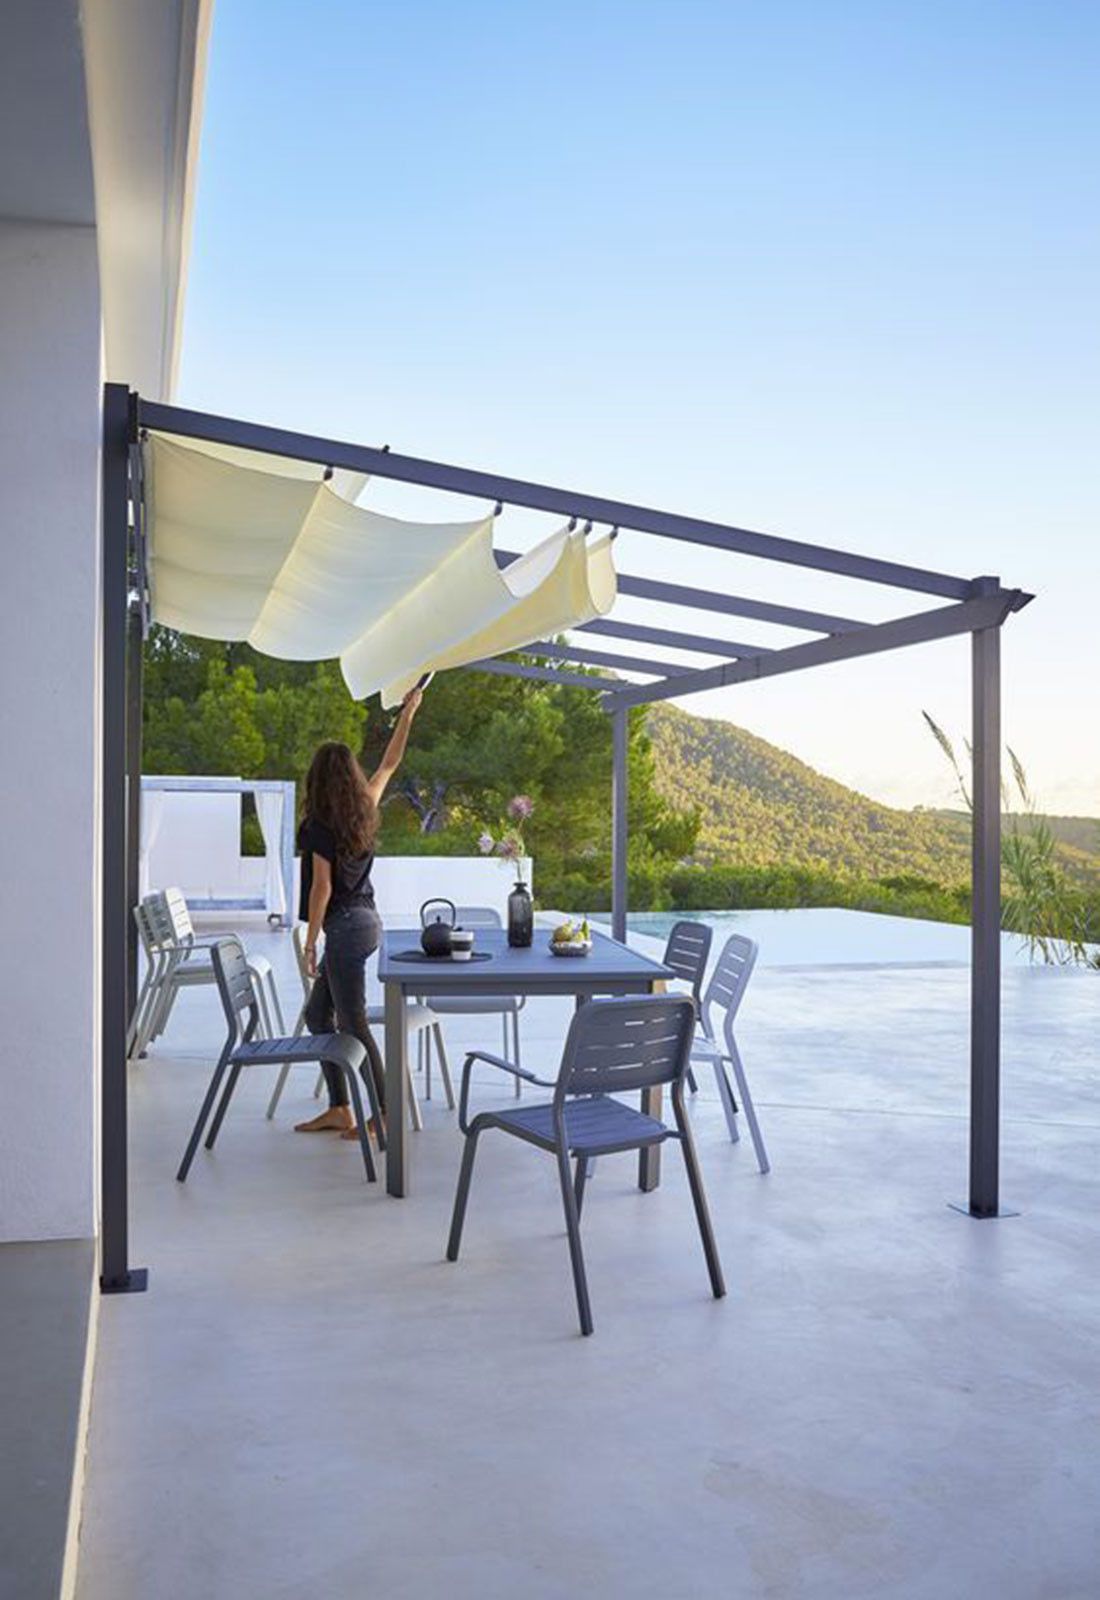 Innovative and Stylish Patio Cover Designs for Your Outdoor Space